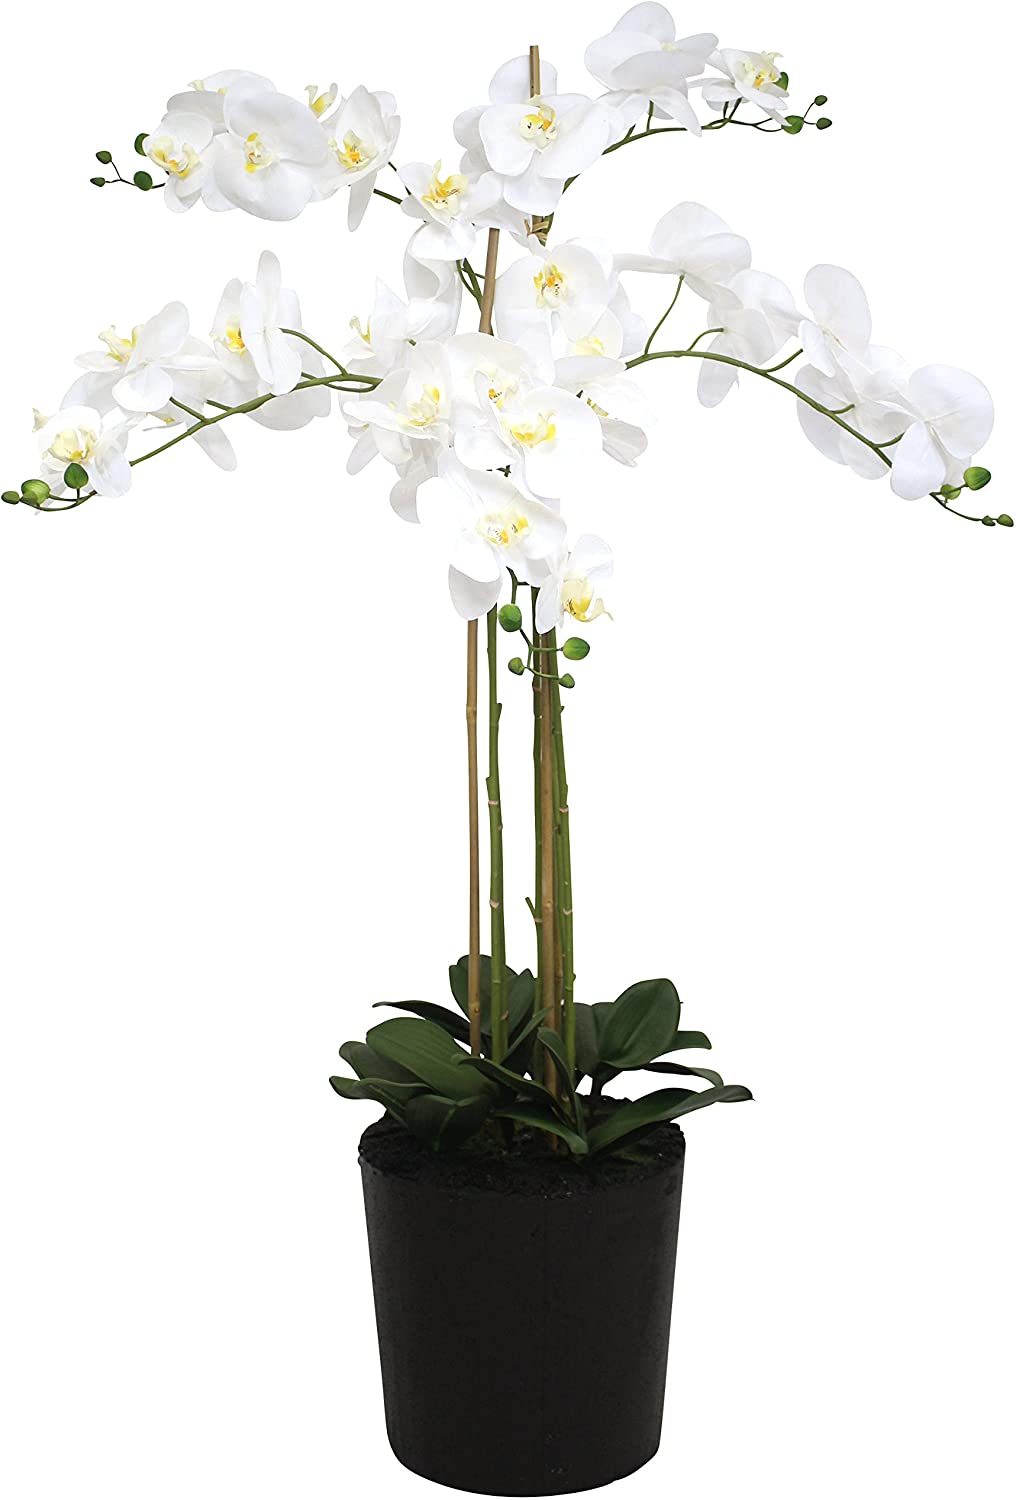 Giant Artificial Orchid With White Flowers